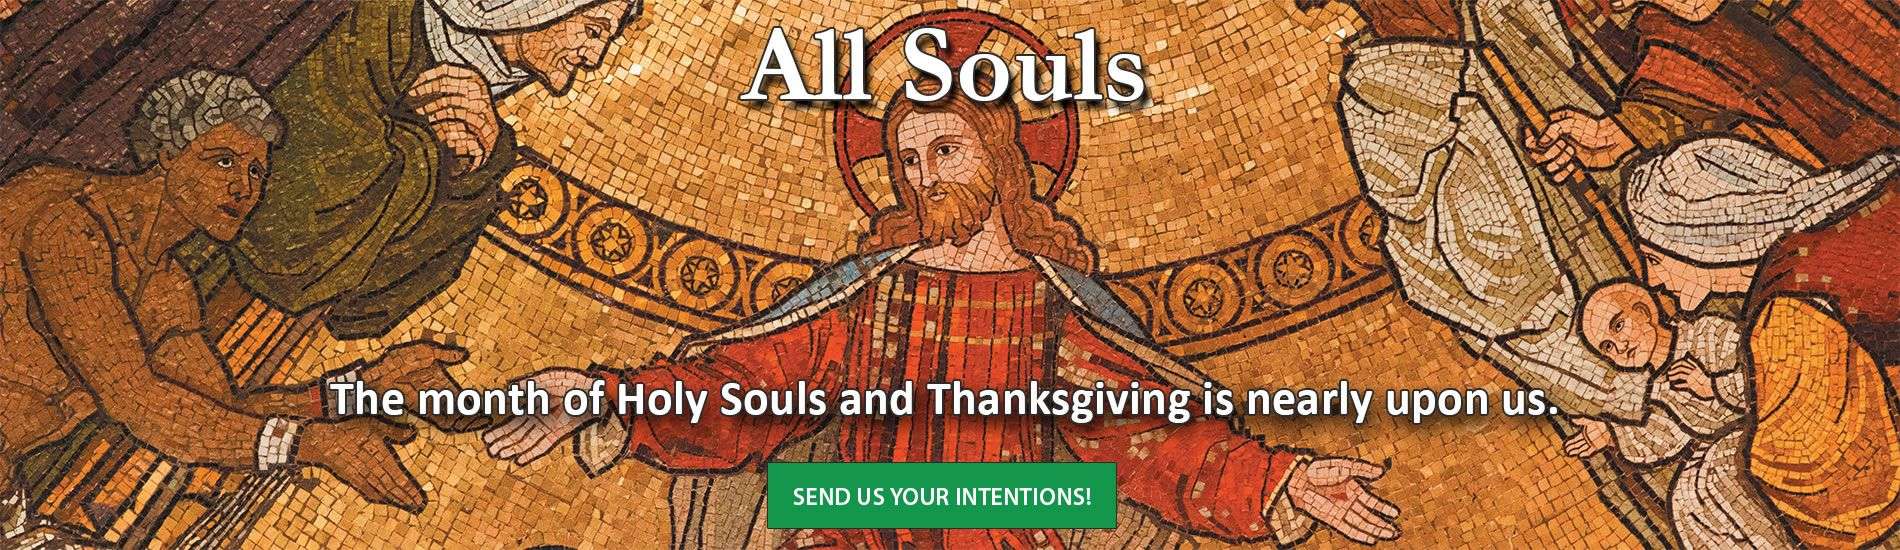 Send us your All Souls intentions!